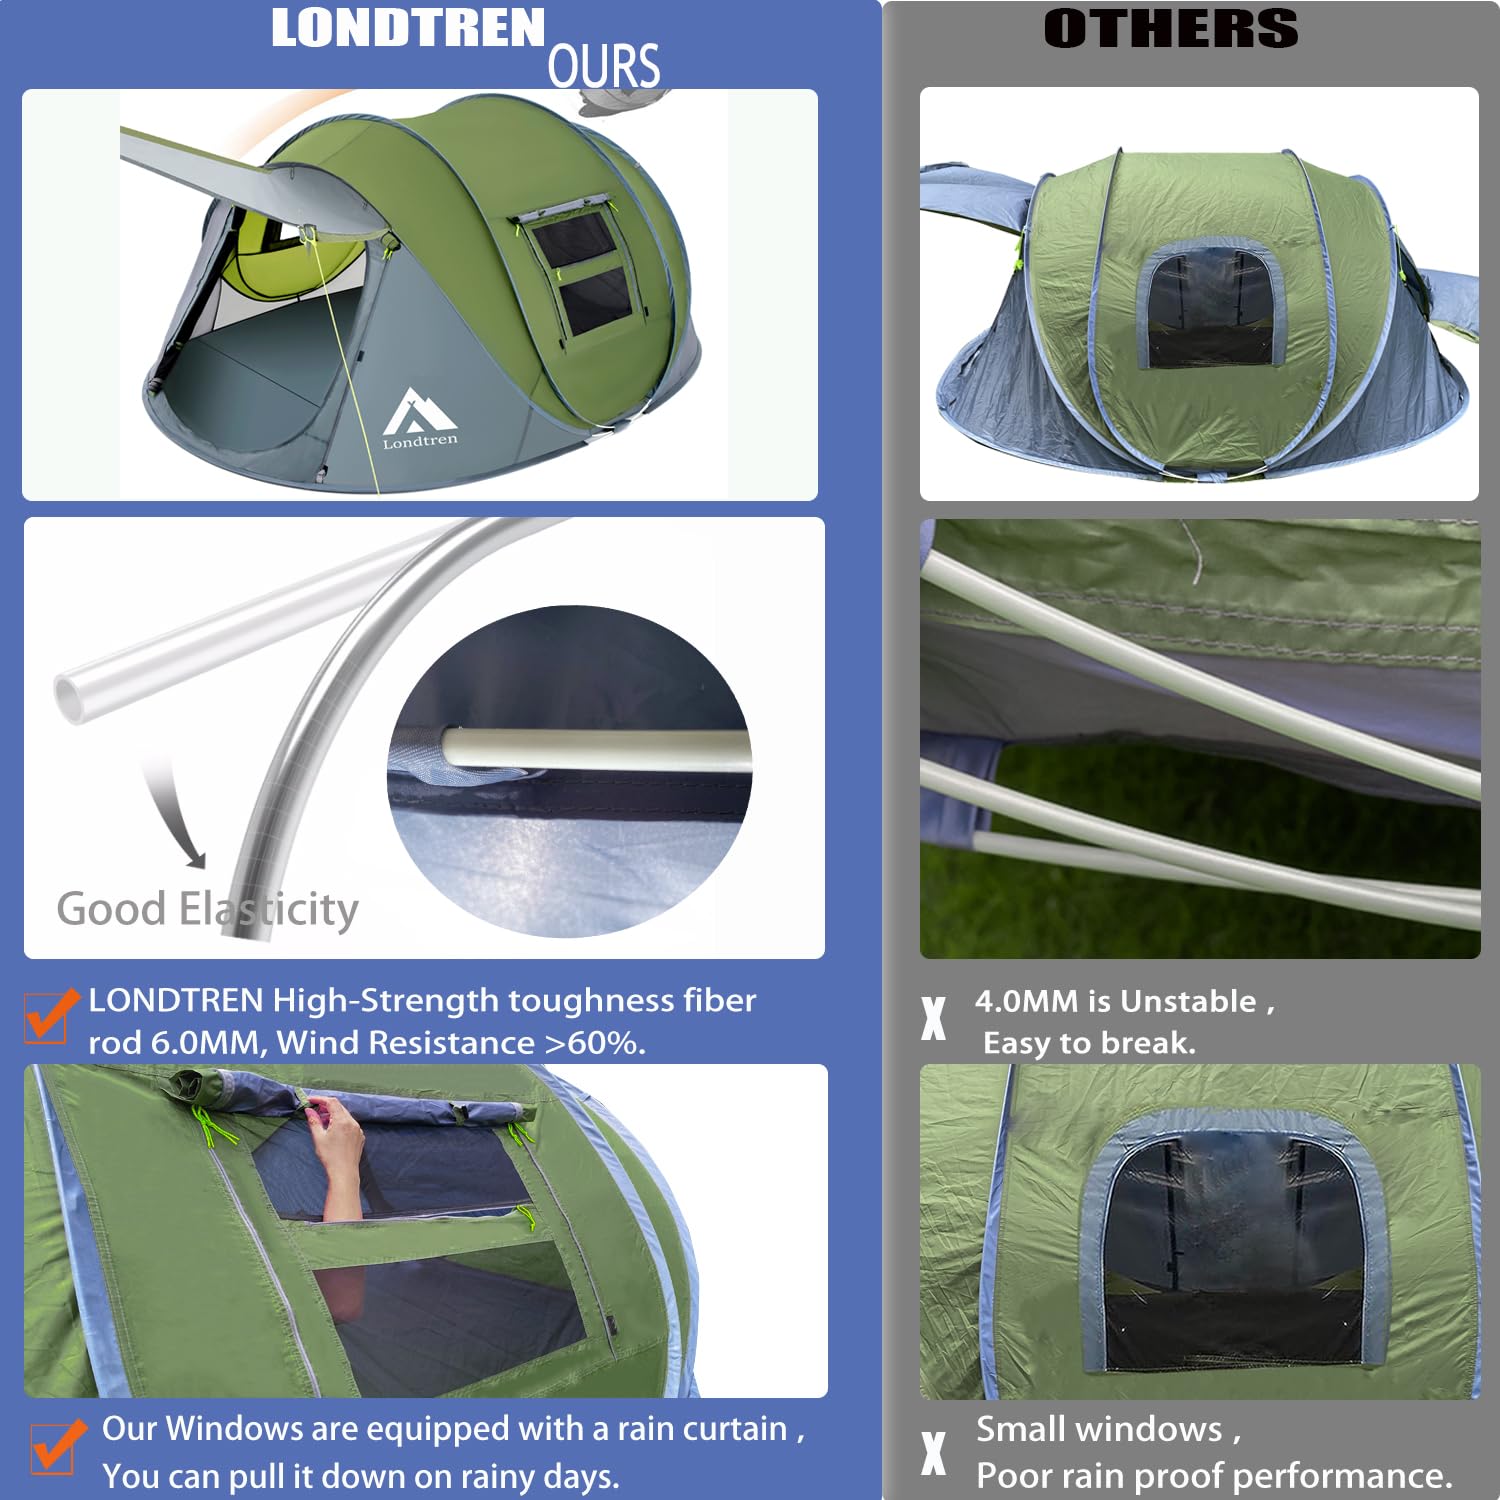 Londtren Pop Up Tents for Camping 4 Person Waterproof Pop Up Army Tents Surplus Tents Military Popup Tent Camping Easy Up Camping Tents I